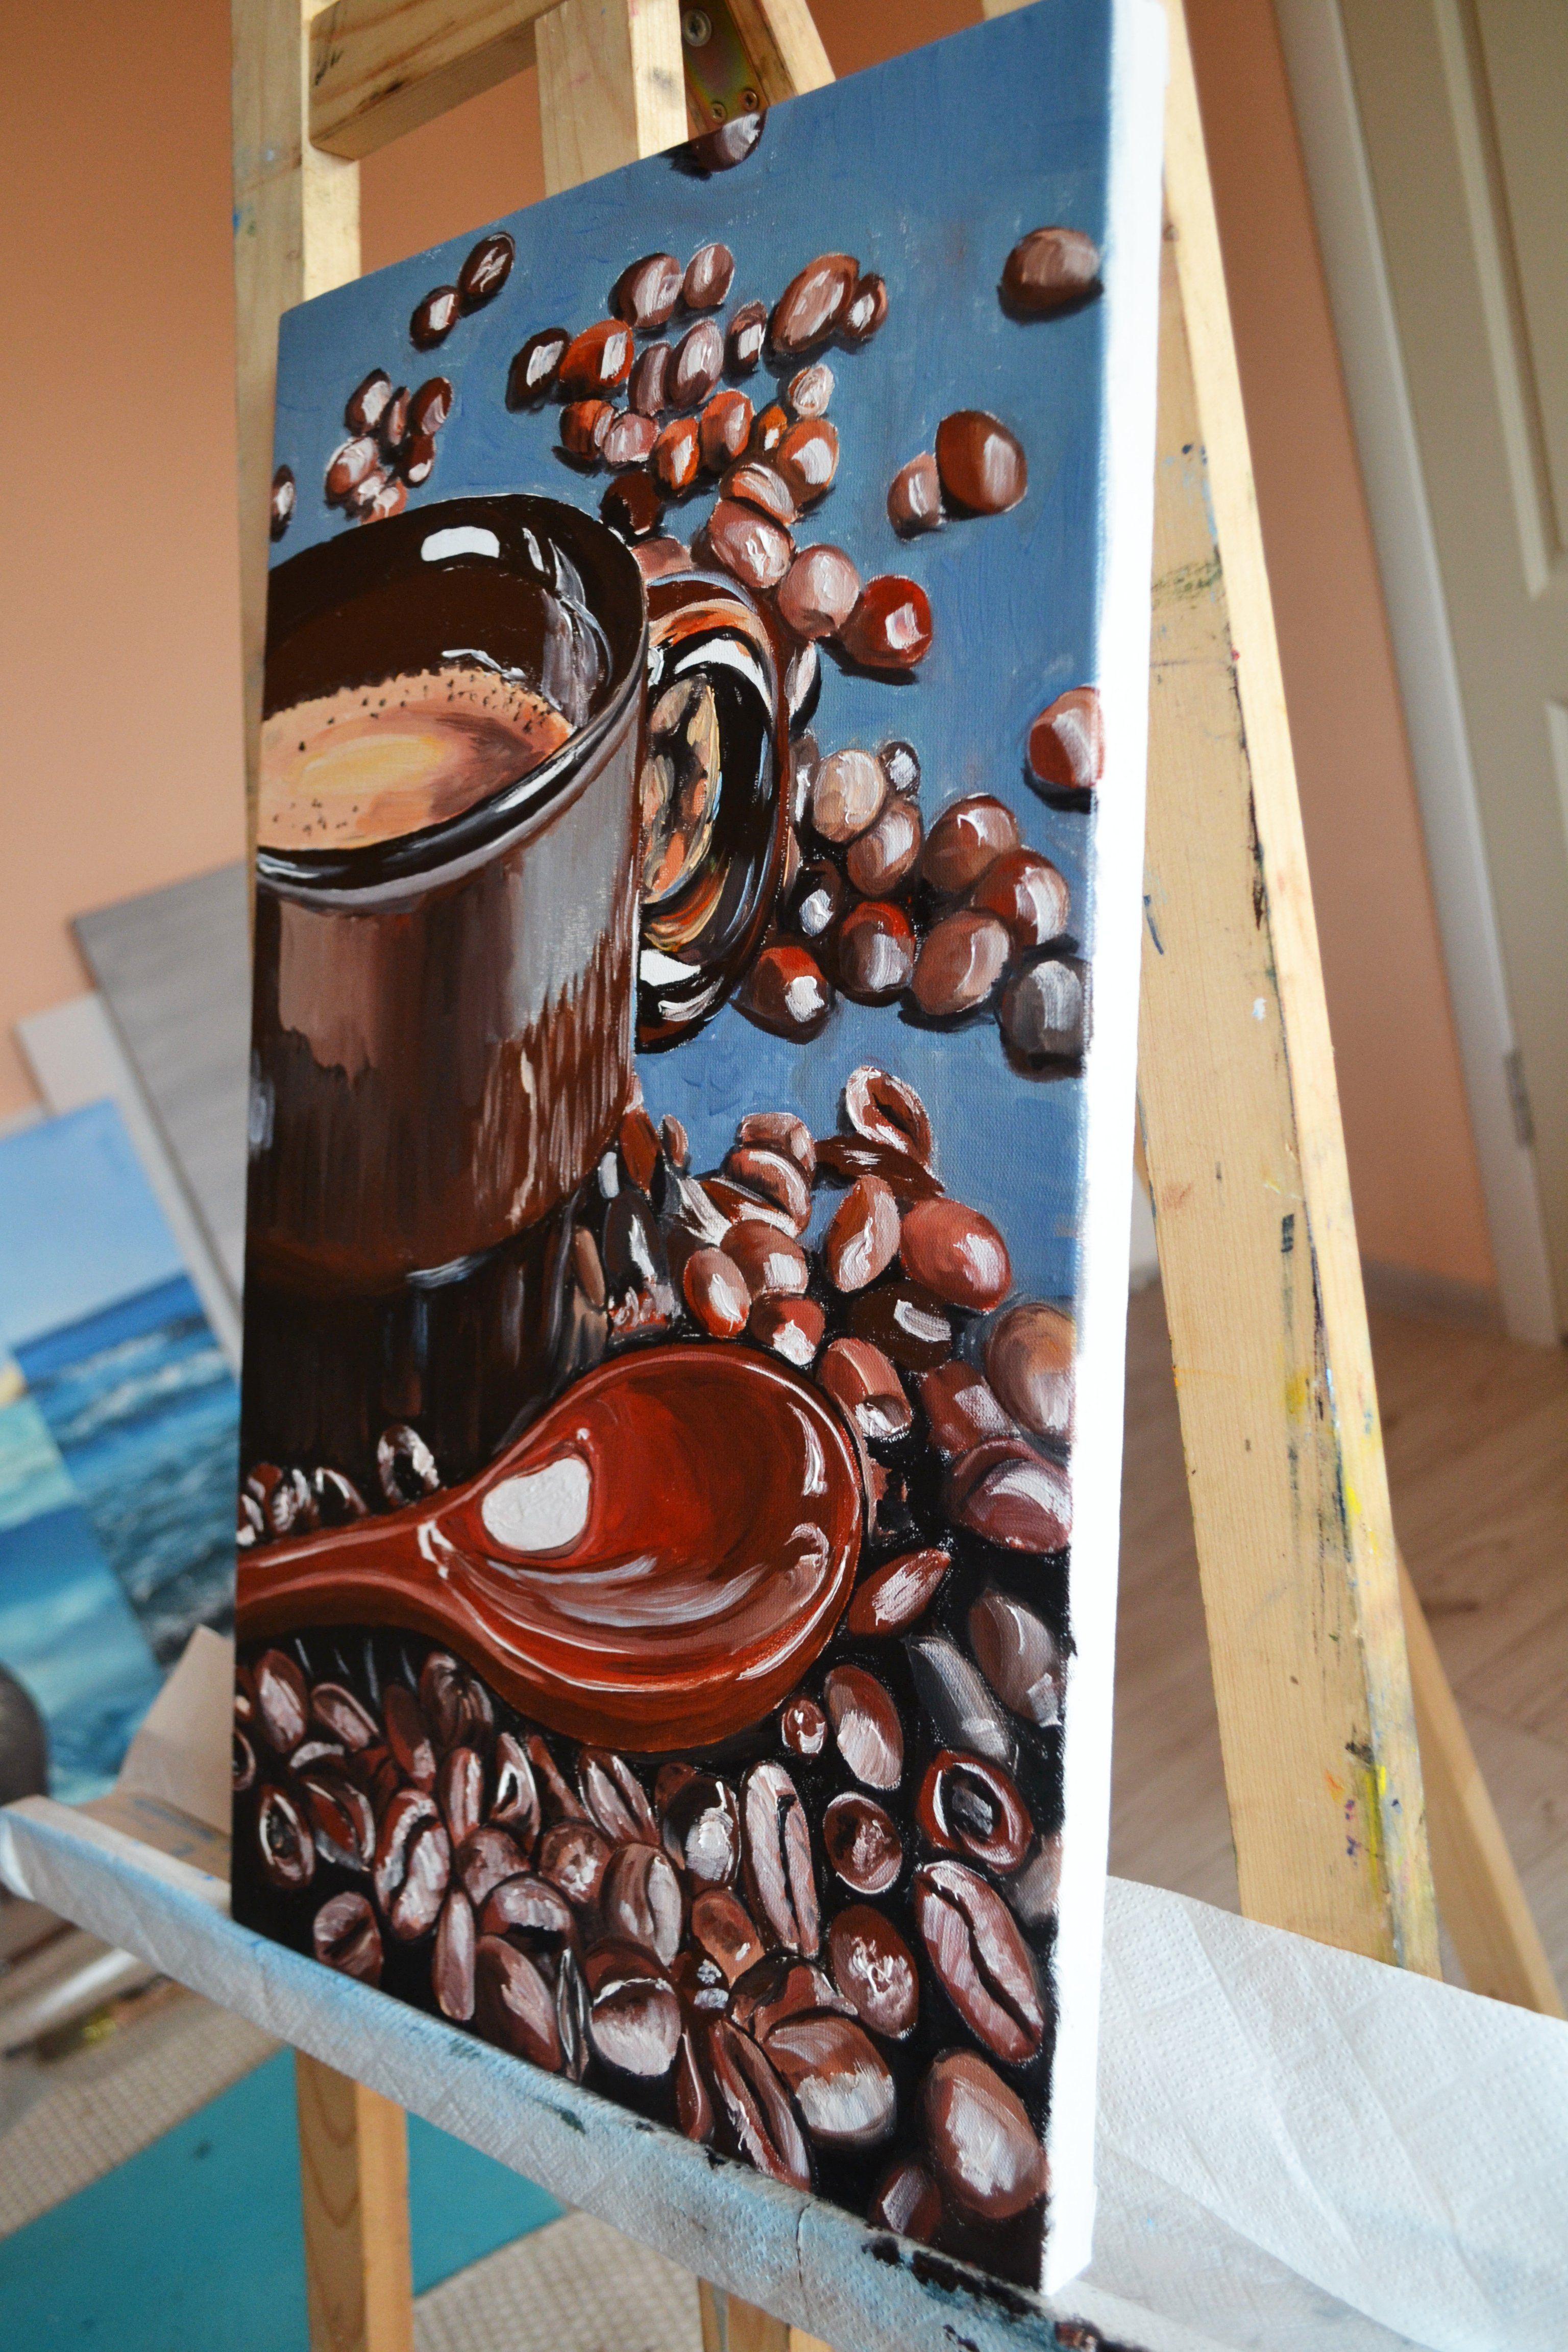 Still life with a painting of a cup of coffee and a spoon with coffee beans on the table. Bright brown and chocolate colors adjust the taste of coffee, cappuccino, espresso, hot chocolate - all that makes cozy autumn mornings and evenings. The